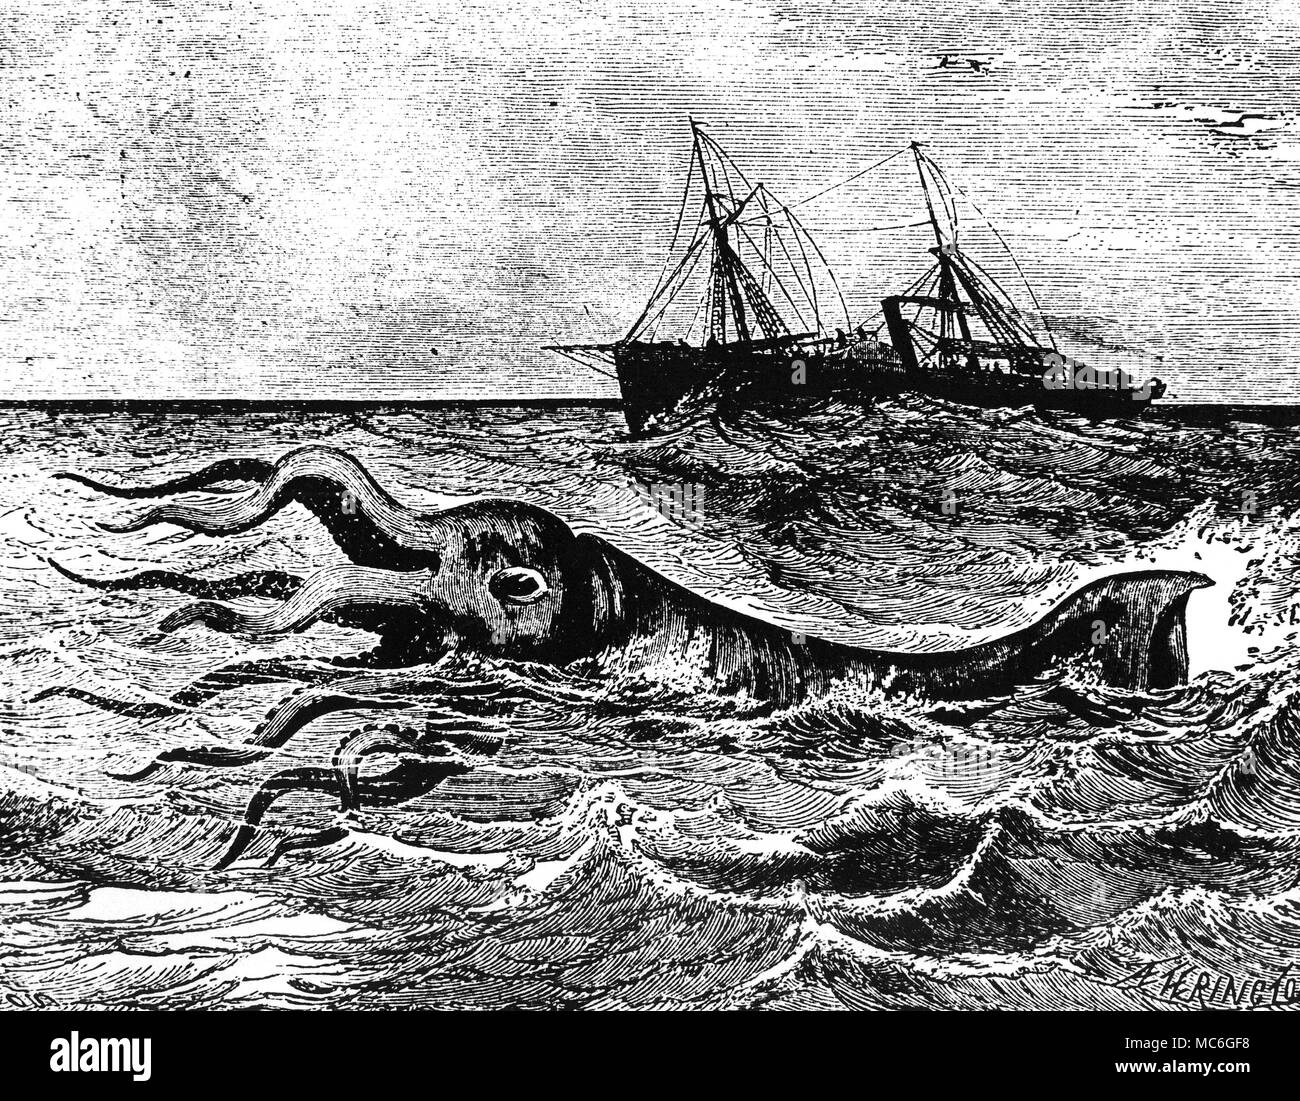 MONSTERS - GIANT SQUID Giant Squid - wood engraving from the 1887 edition of J.P. Boyd's Wonders of the Heavens, Earth and Ocean. Stock Photo